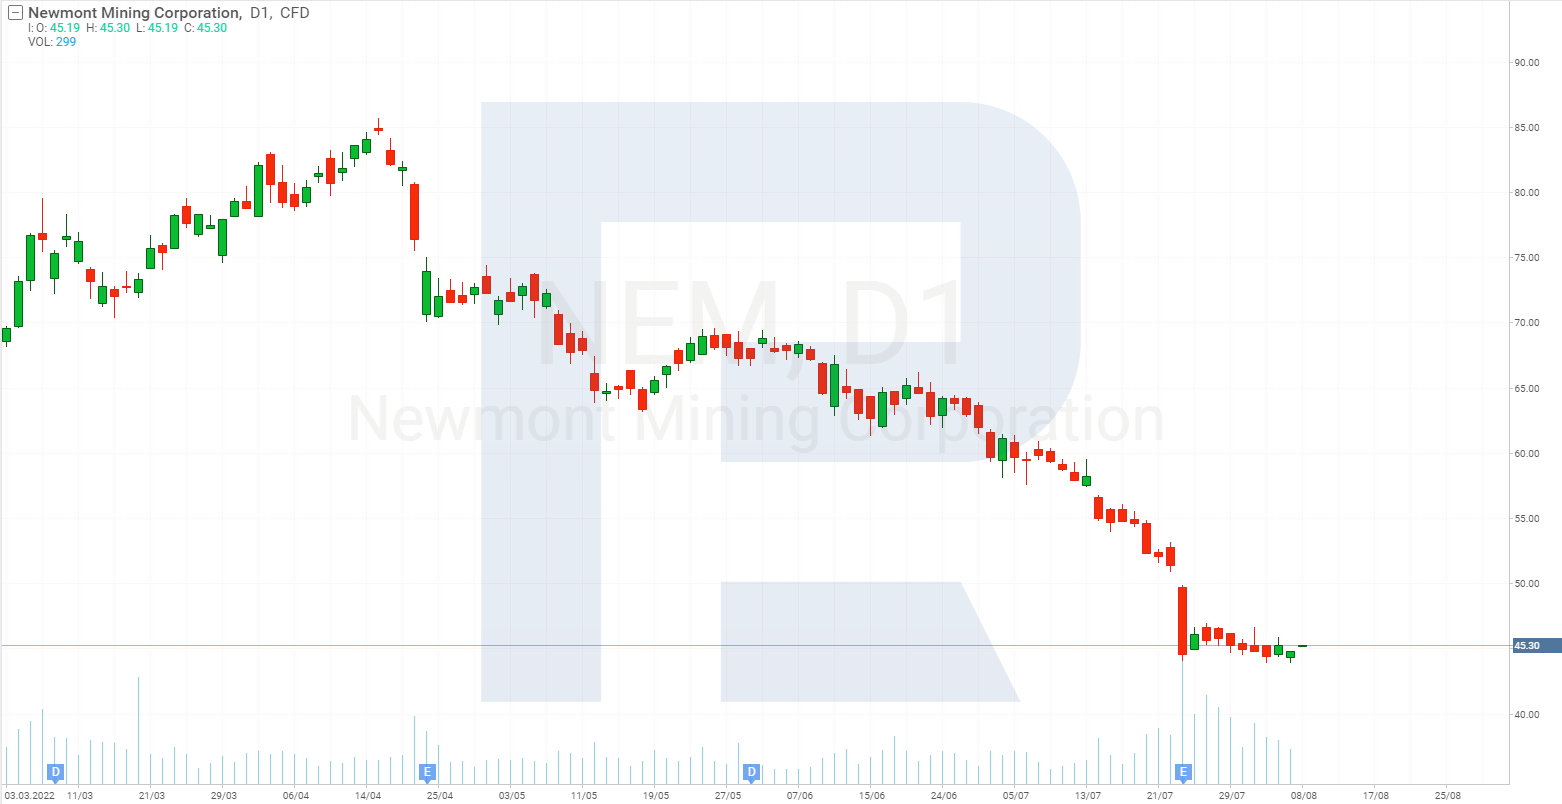 Share price chart of Newmont